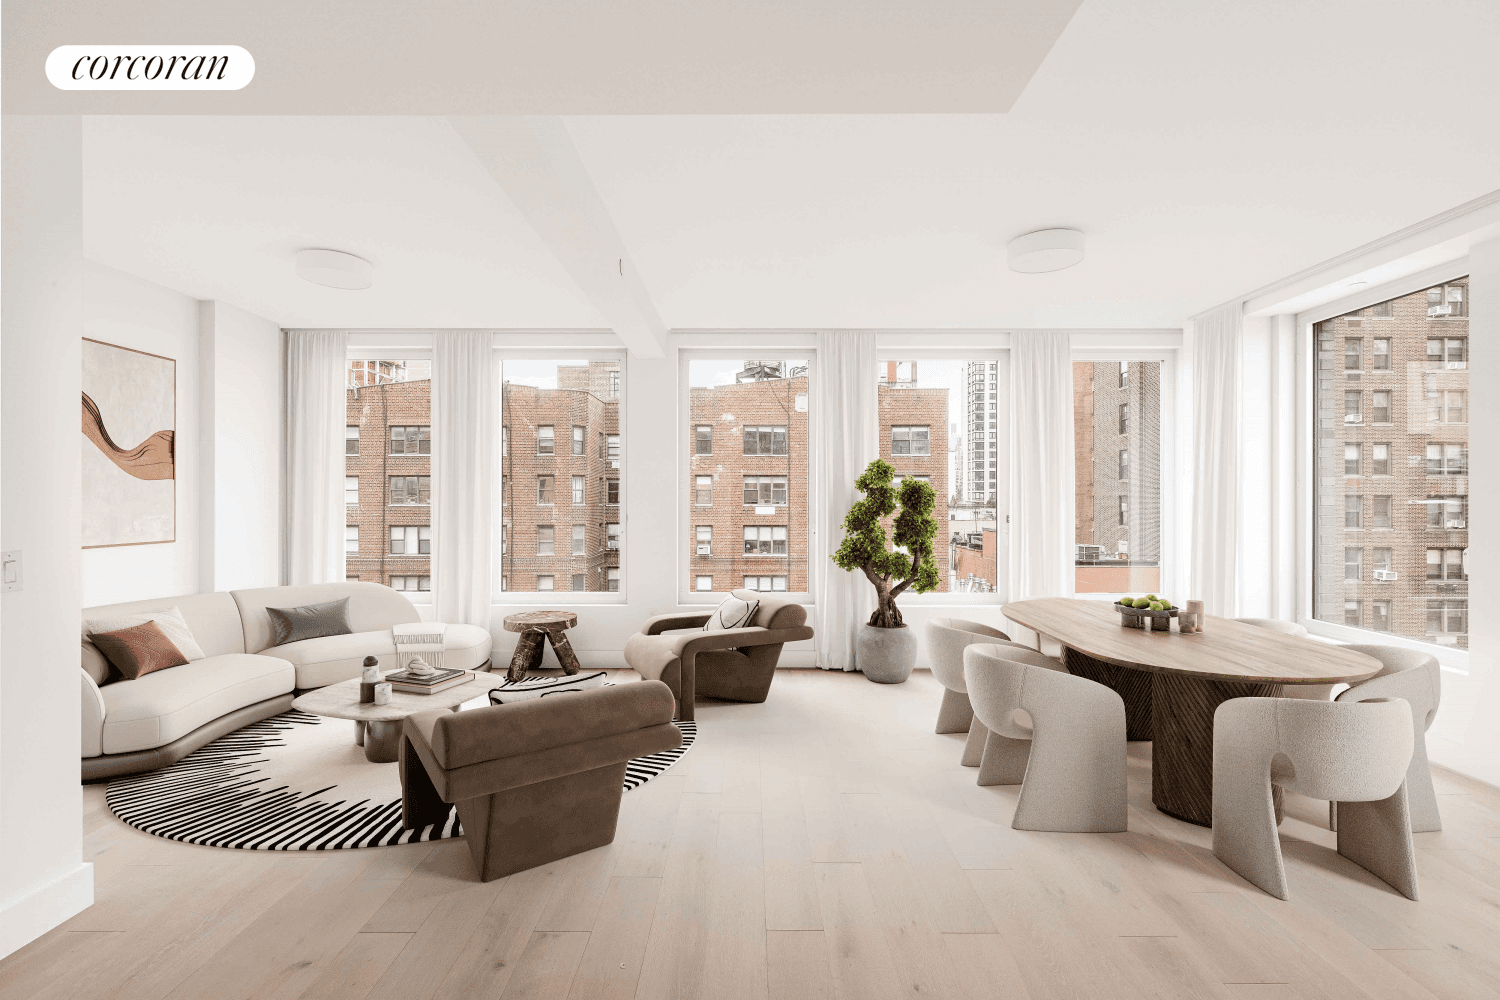 8th Floor at 323 East 79th StreetTwo Bedrooms Two Baths Powder Room Private Outdoor Space 1, 910 sqft323 E 79th Street offers a blend of contemporary elegance and modern comfort ...